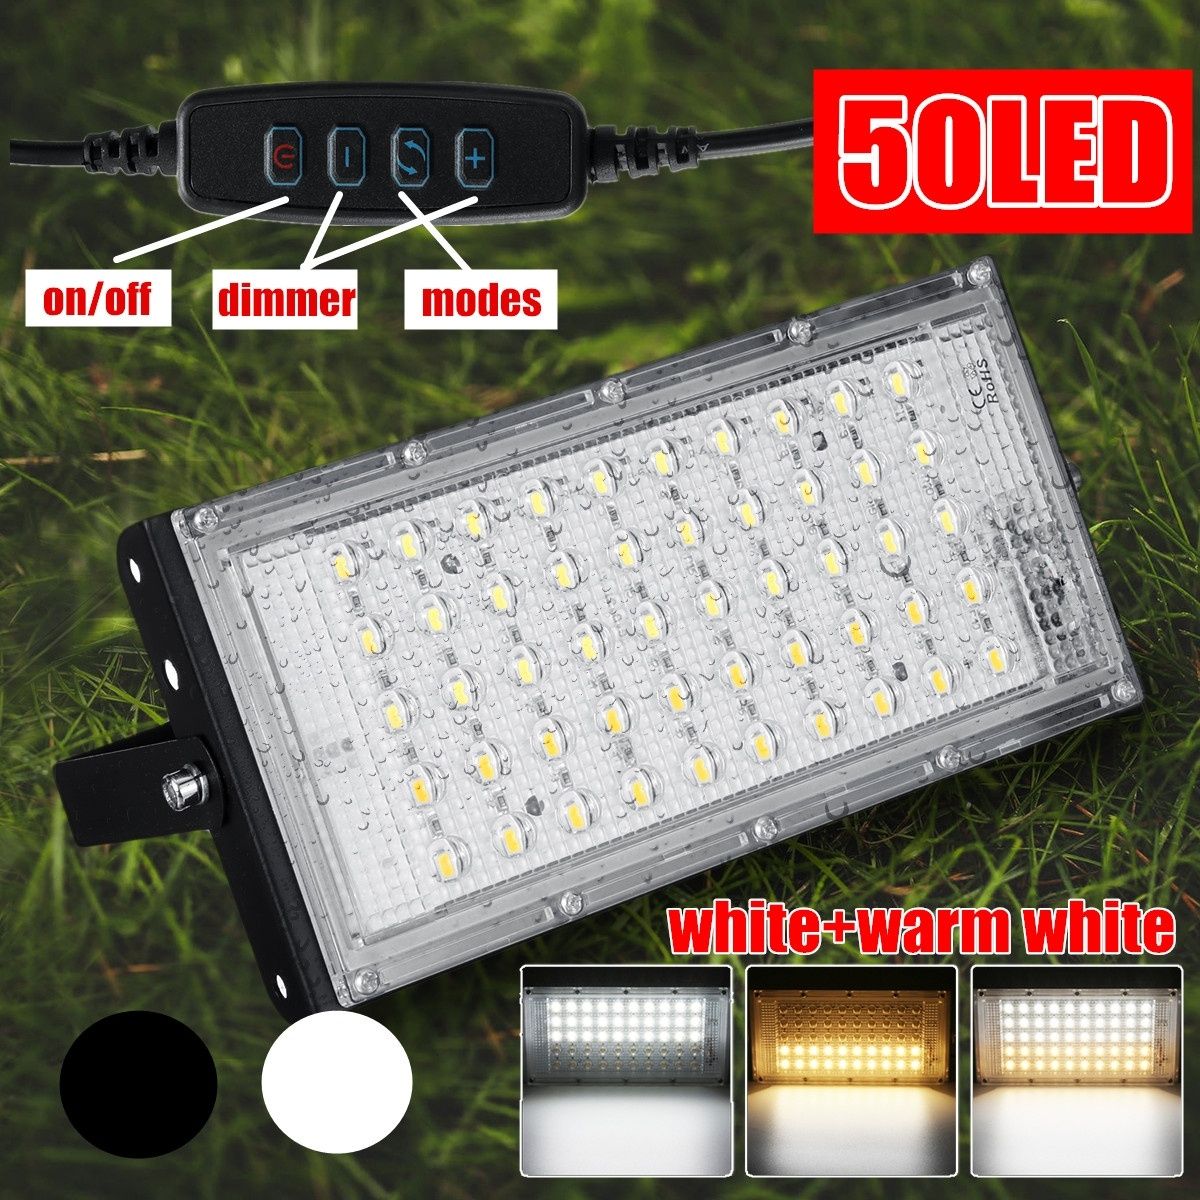 50W-50LED-Dimmable-Flood-Light-IP65-Waterproof-Landscape-Outdoor-Lamp-3-Modes-1595791